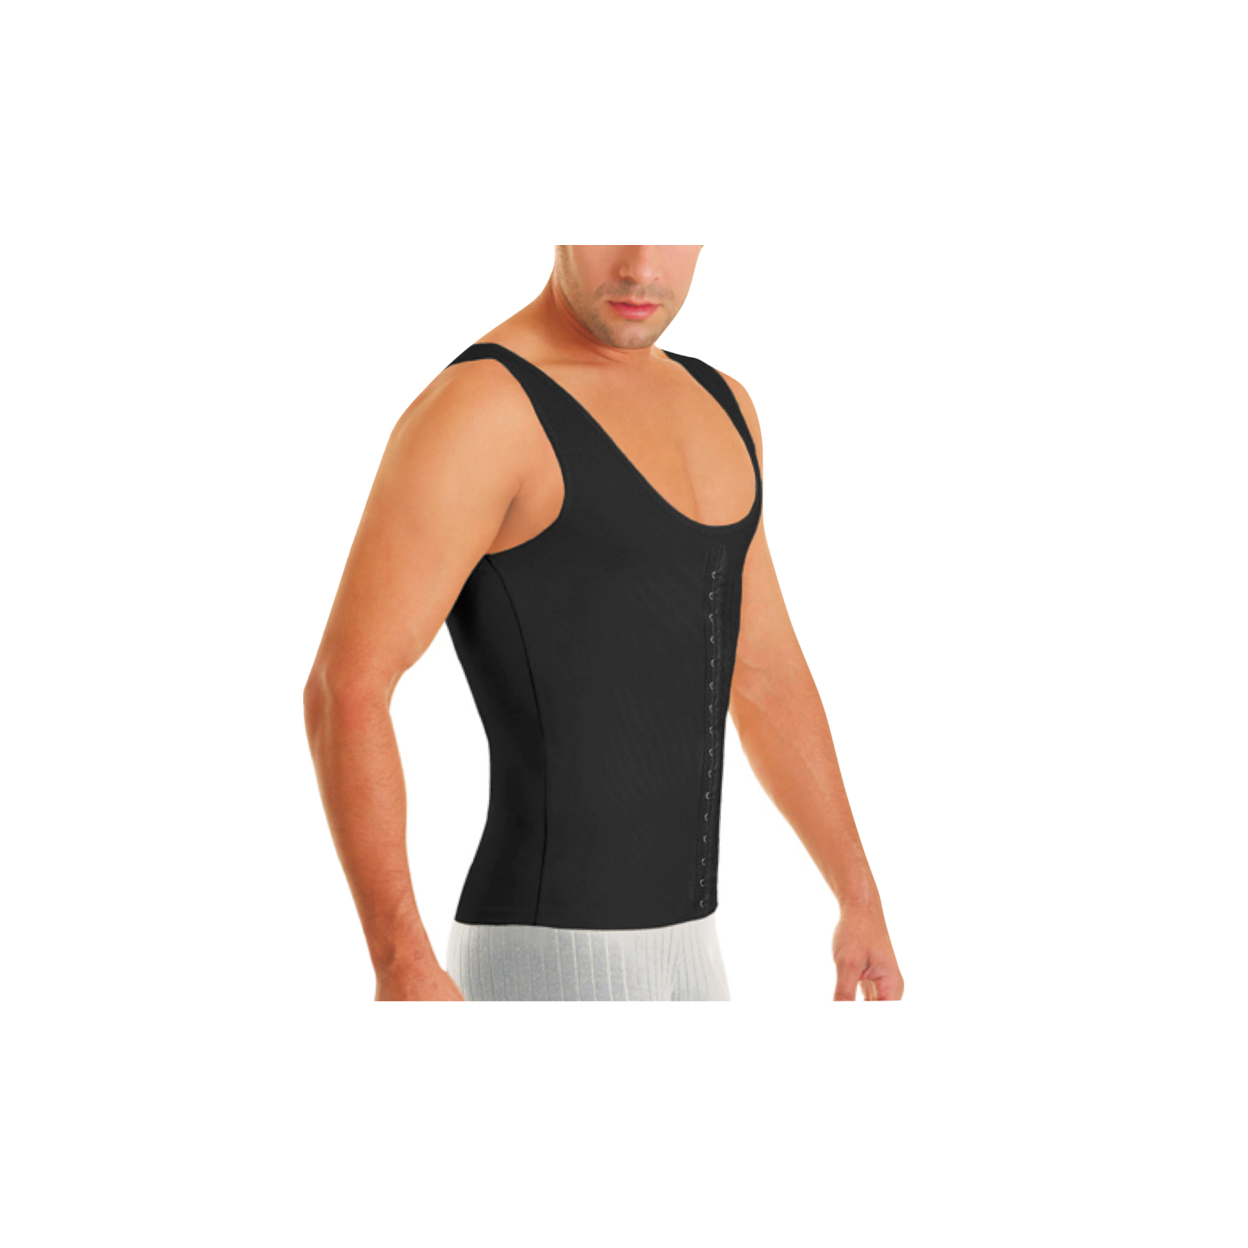 Men Waistcoat High-Compression Body Shaper In Regular And Plus Sizes - Black, 2X